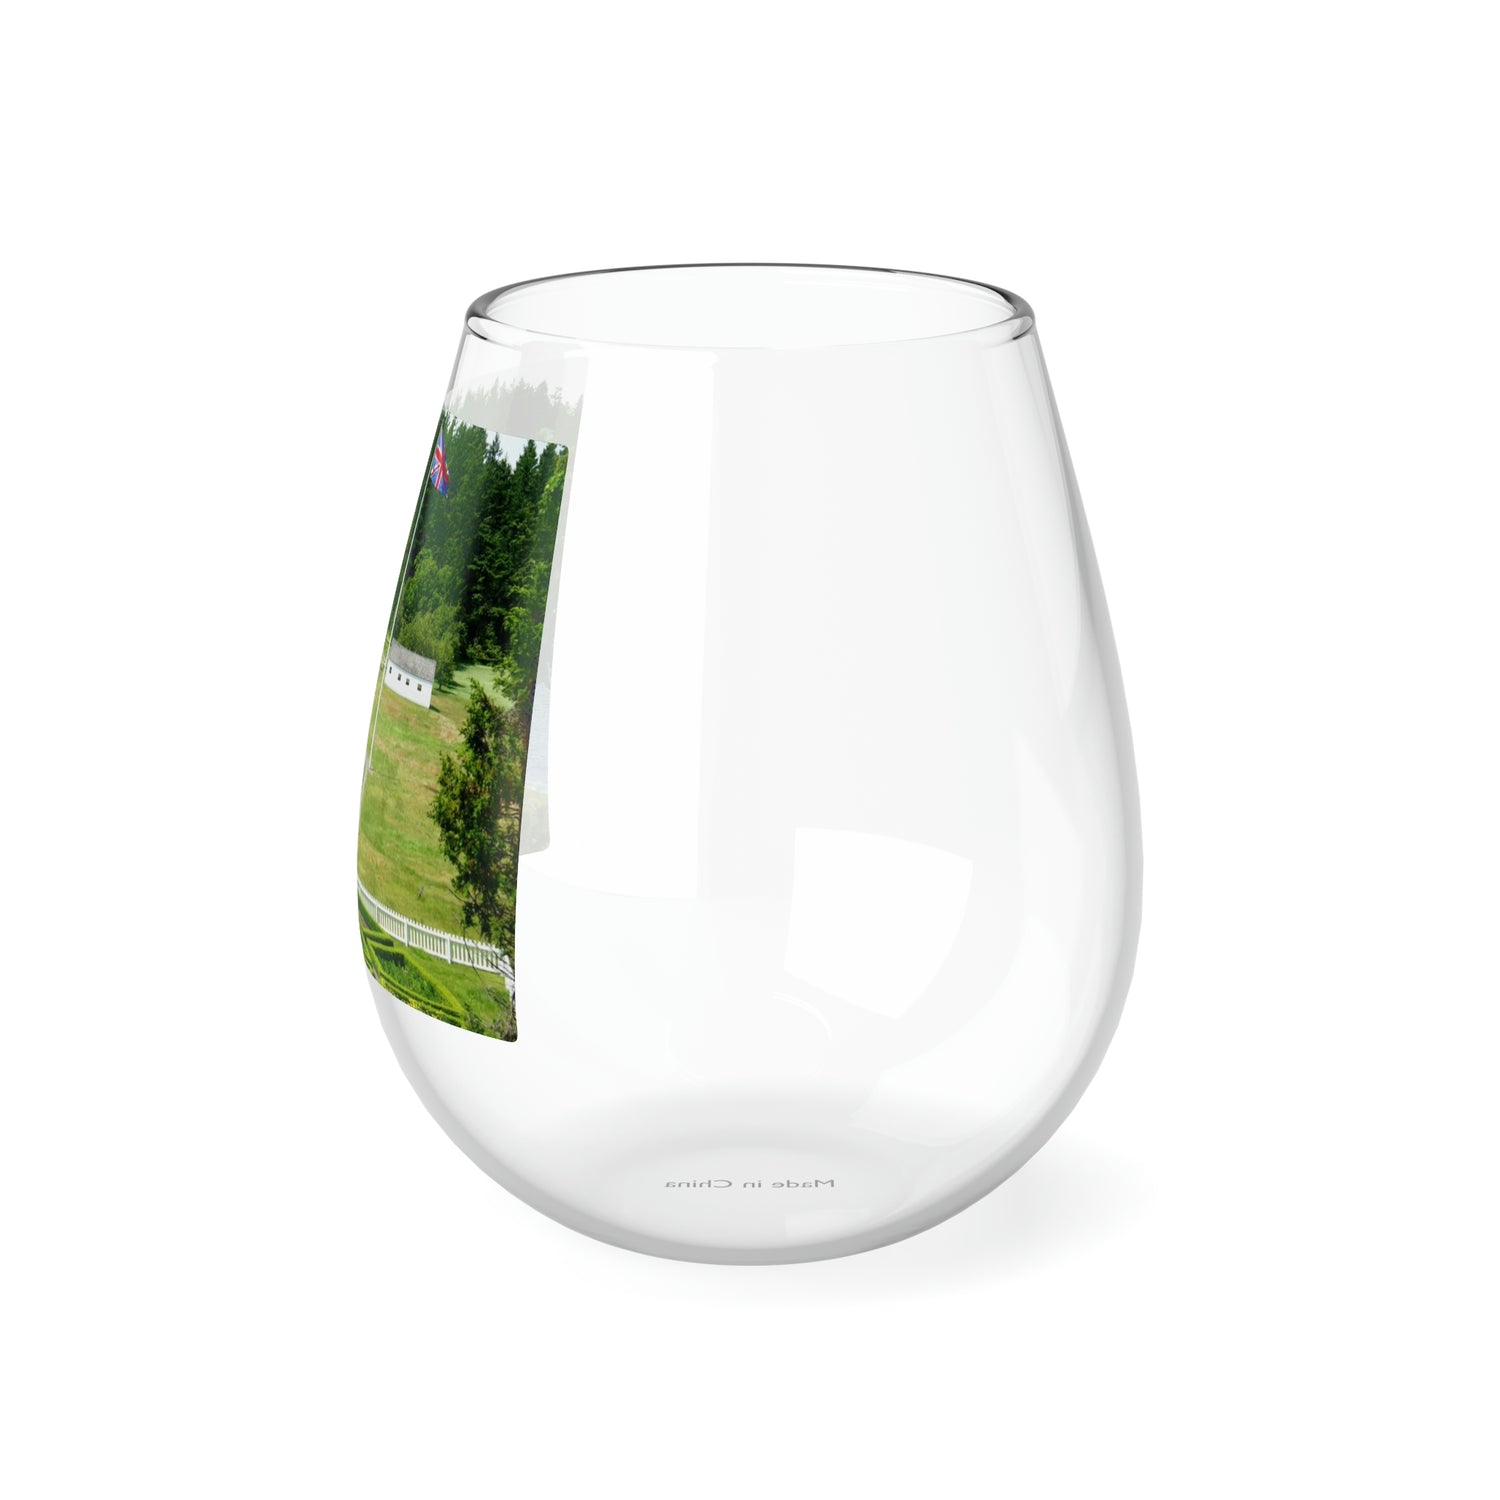 Magnificent Grandiose Views - Stemless Wine Glass, 11.75 oz - Fry1Productions